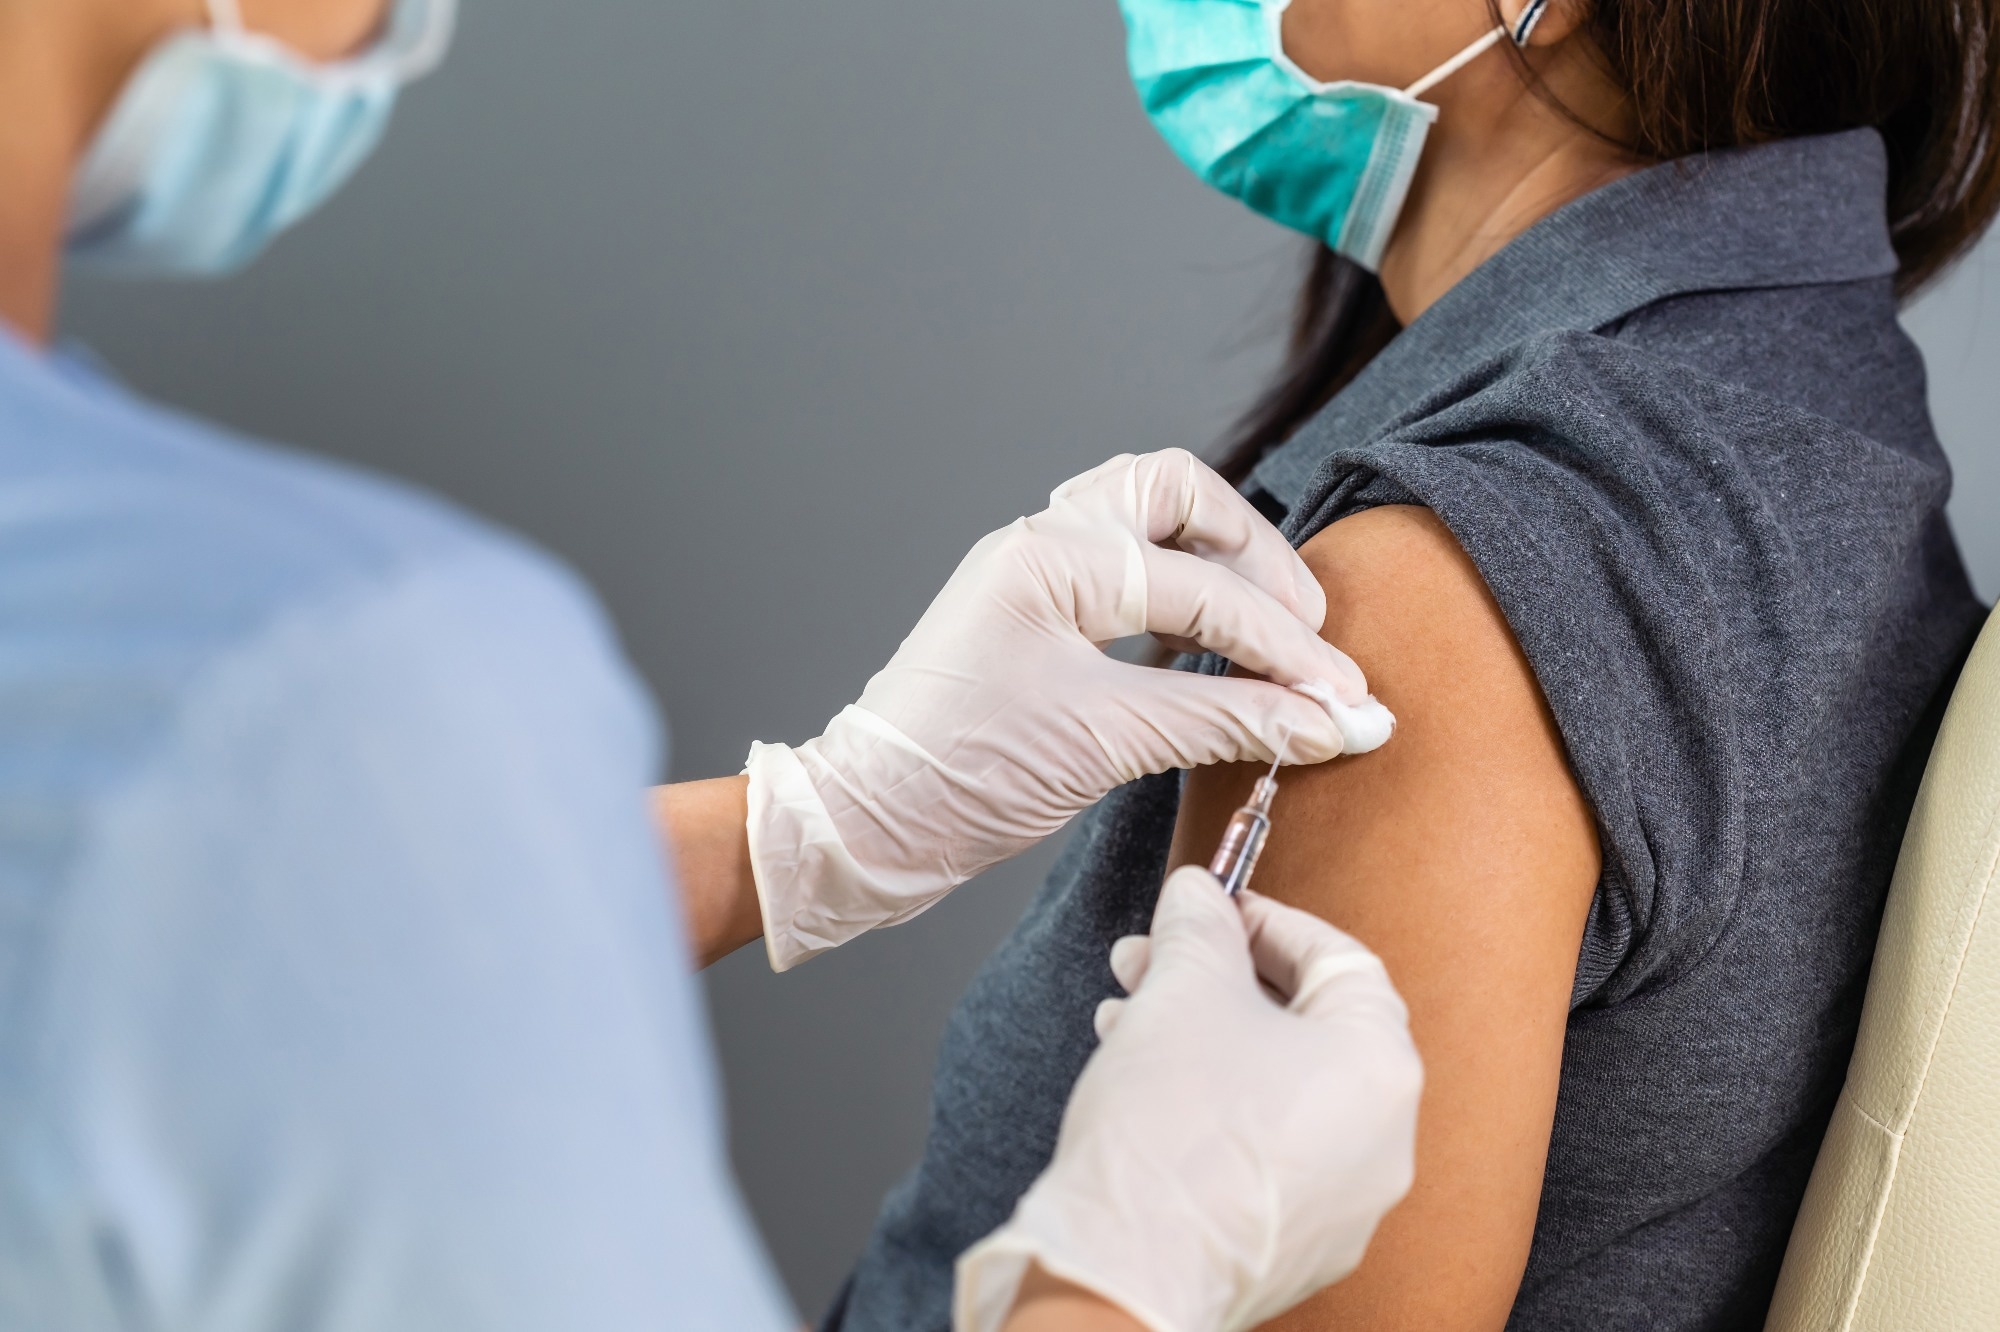 Study: Factors Associated with Stroke after COVID-19 Vaccination: A Statewide Analysis. Image Credit: BaLL LunLa/Shutterstock